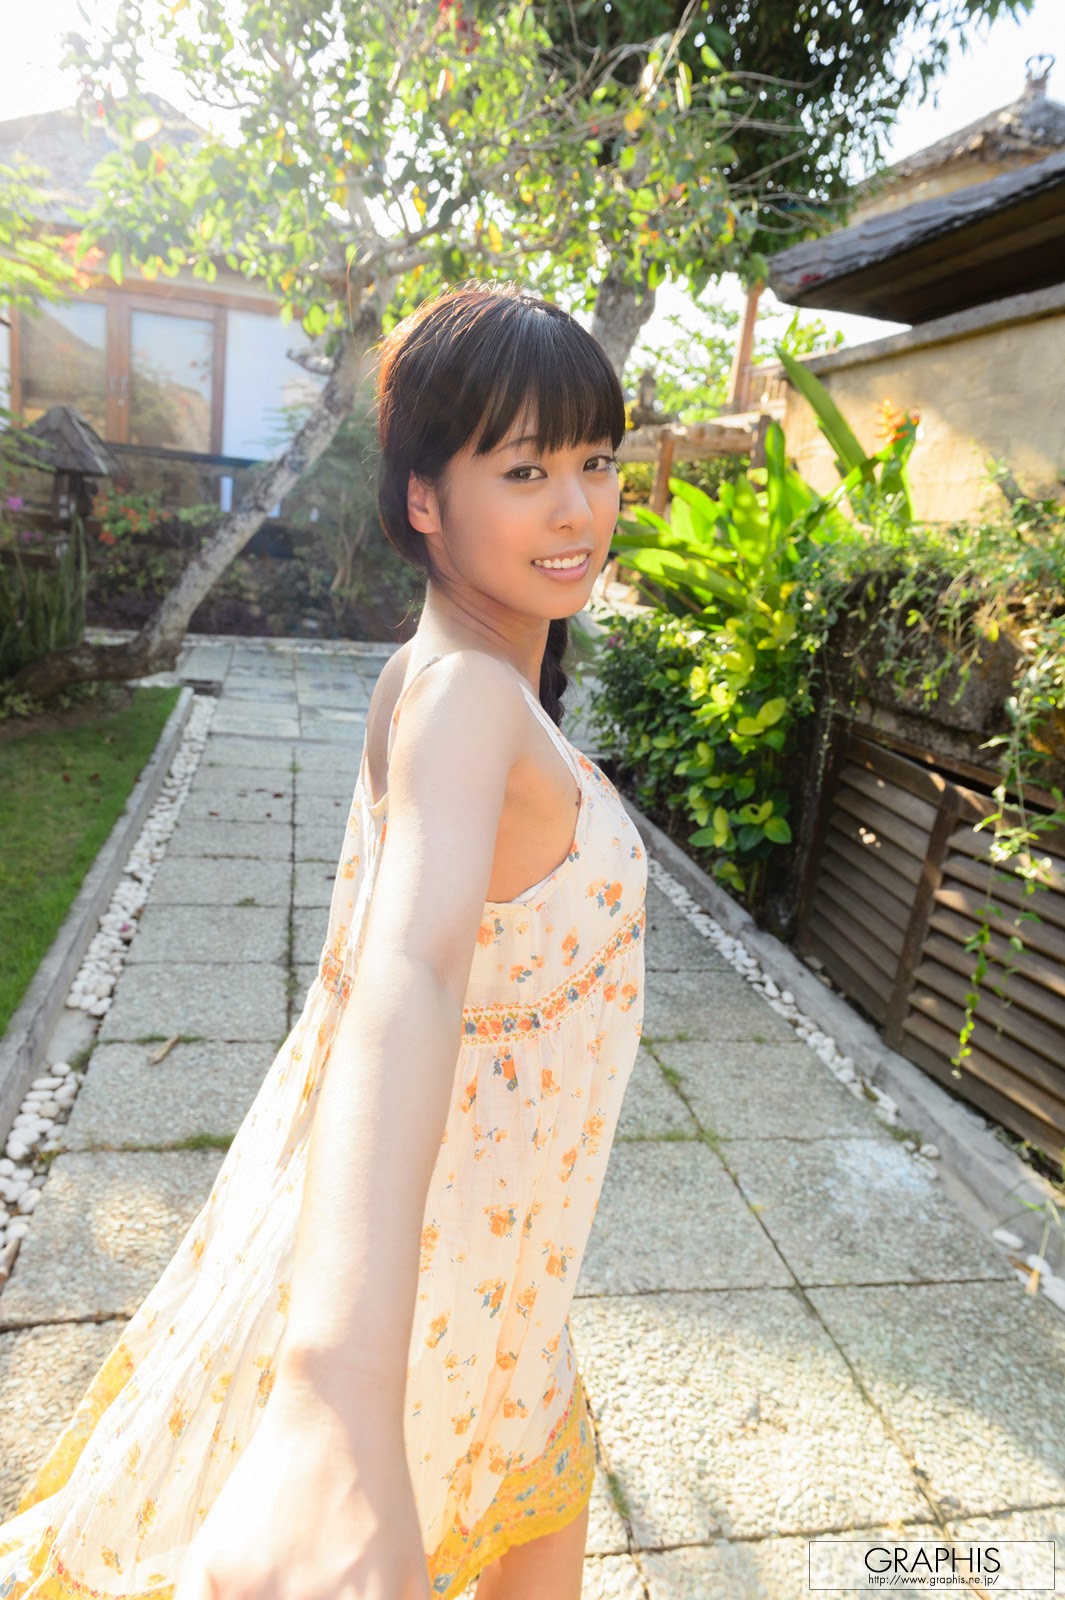 [graphis] Mayu Sato First Gravure No 128 Tabakus Gallery With